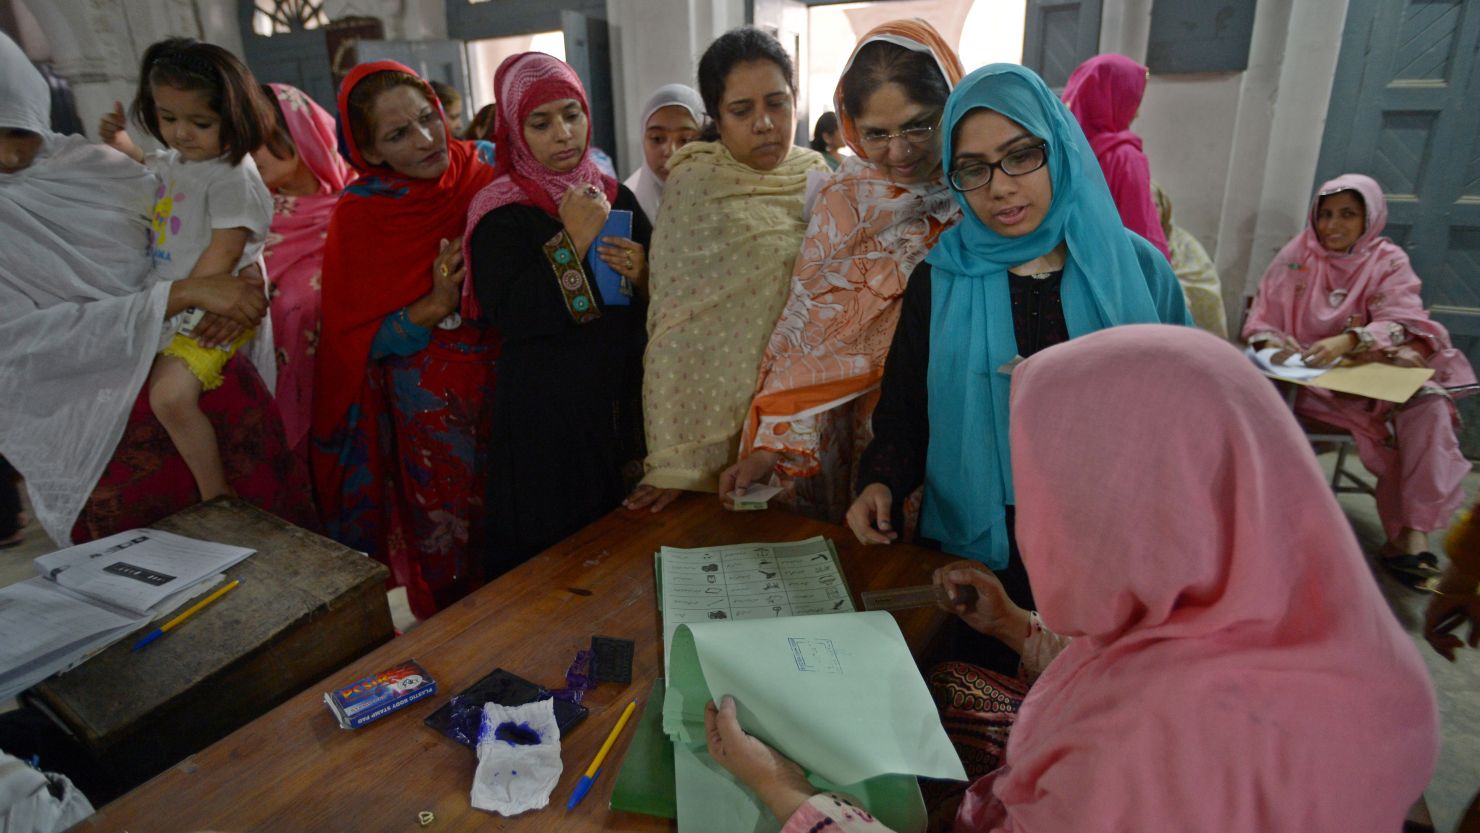 Pakistani women can vote, but should be lightly beaten if they defy their husbands' commands, an Islamic council recommends. 